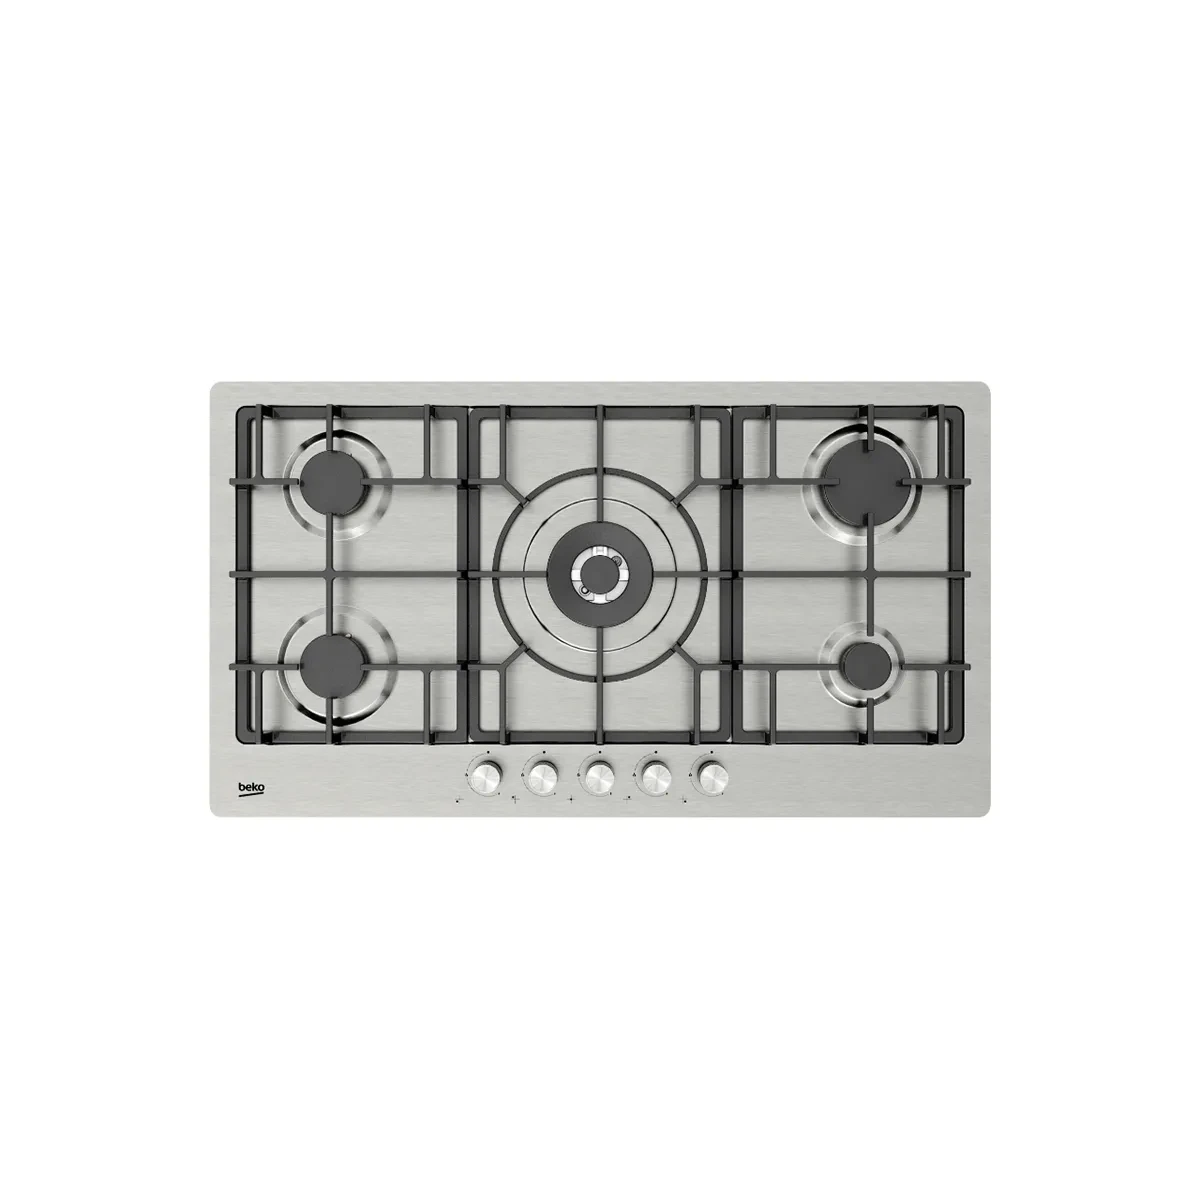 Beko Gas Hob 90 cm- 5 Berners - Gas Safety- Cast Iron Pan support- stainless